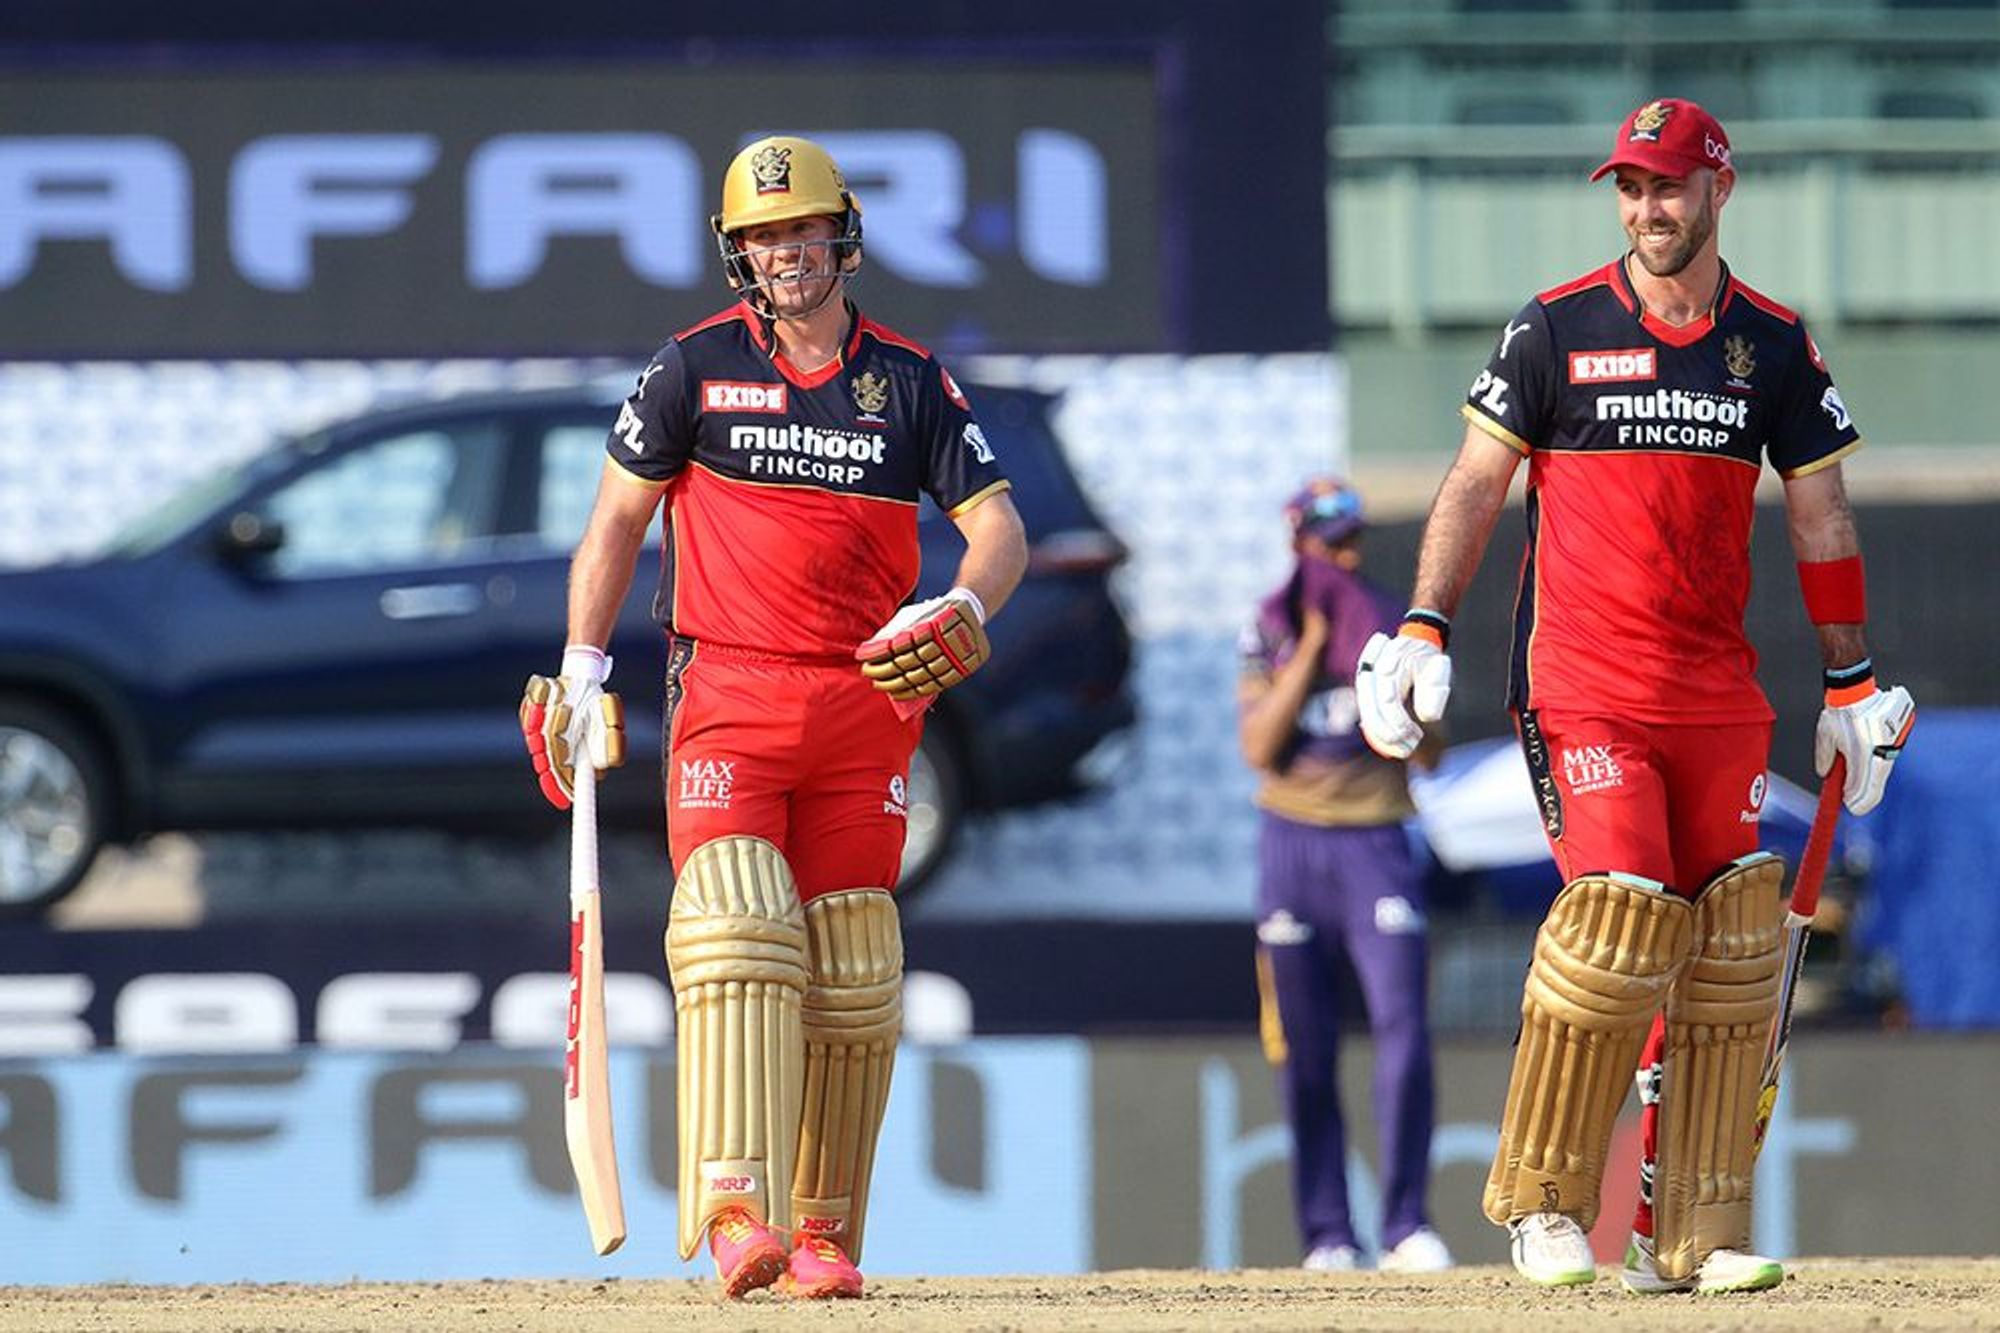 Maxwell made 78 and De Villiers made 76* for RCB | BCCI/IPL